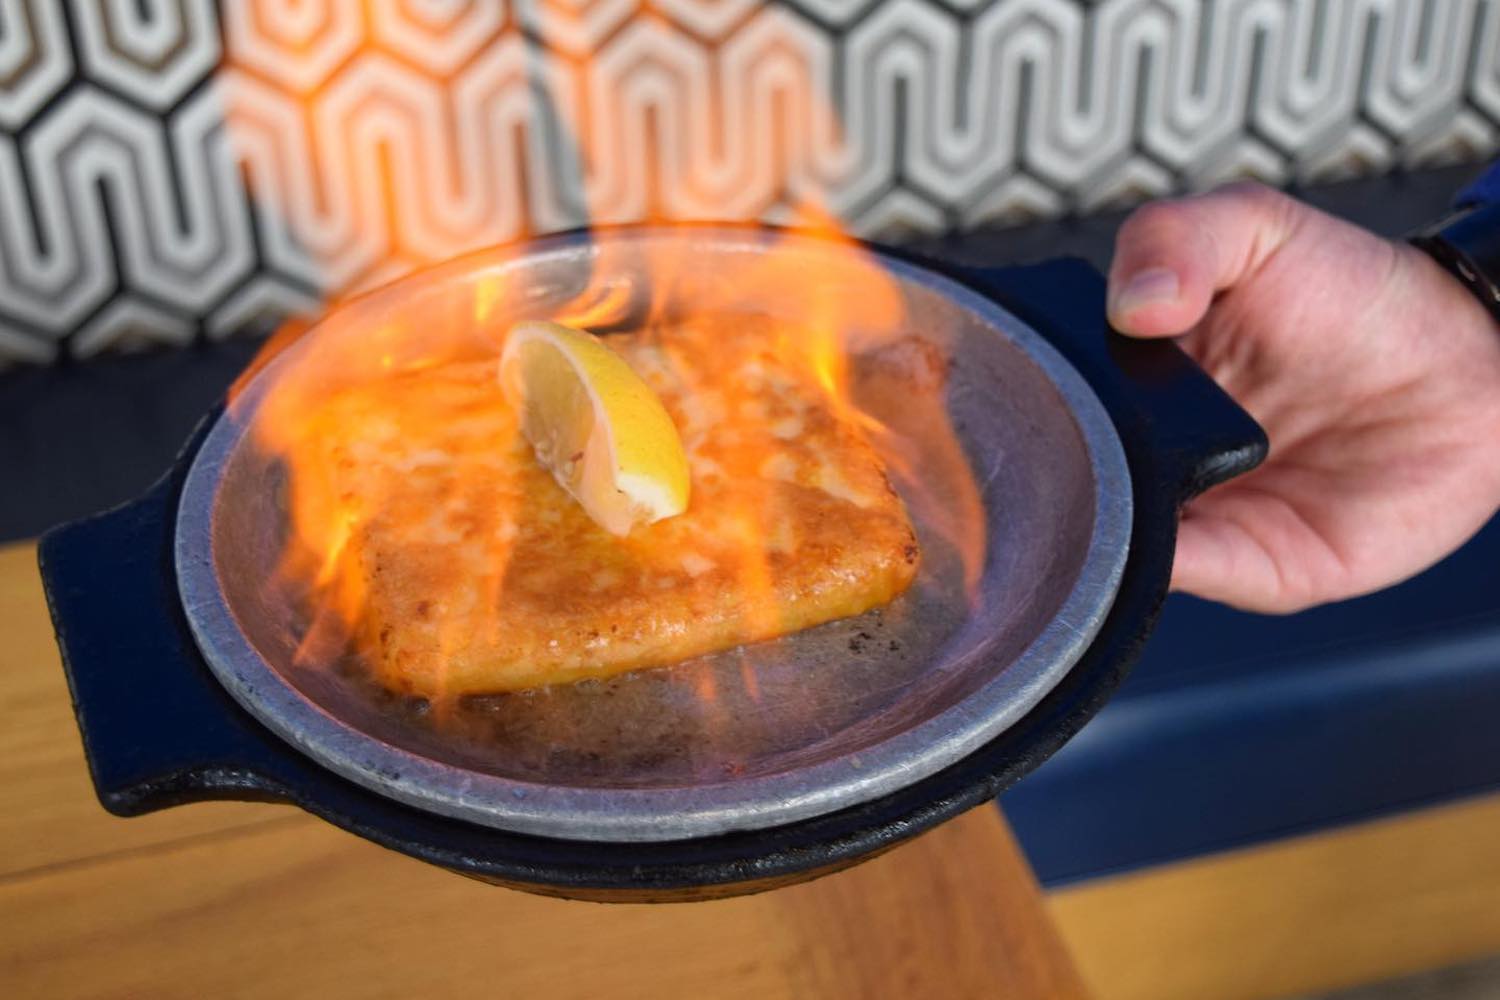 a flaming dish of saganaki on a blue plate with a lemon on top